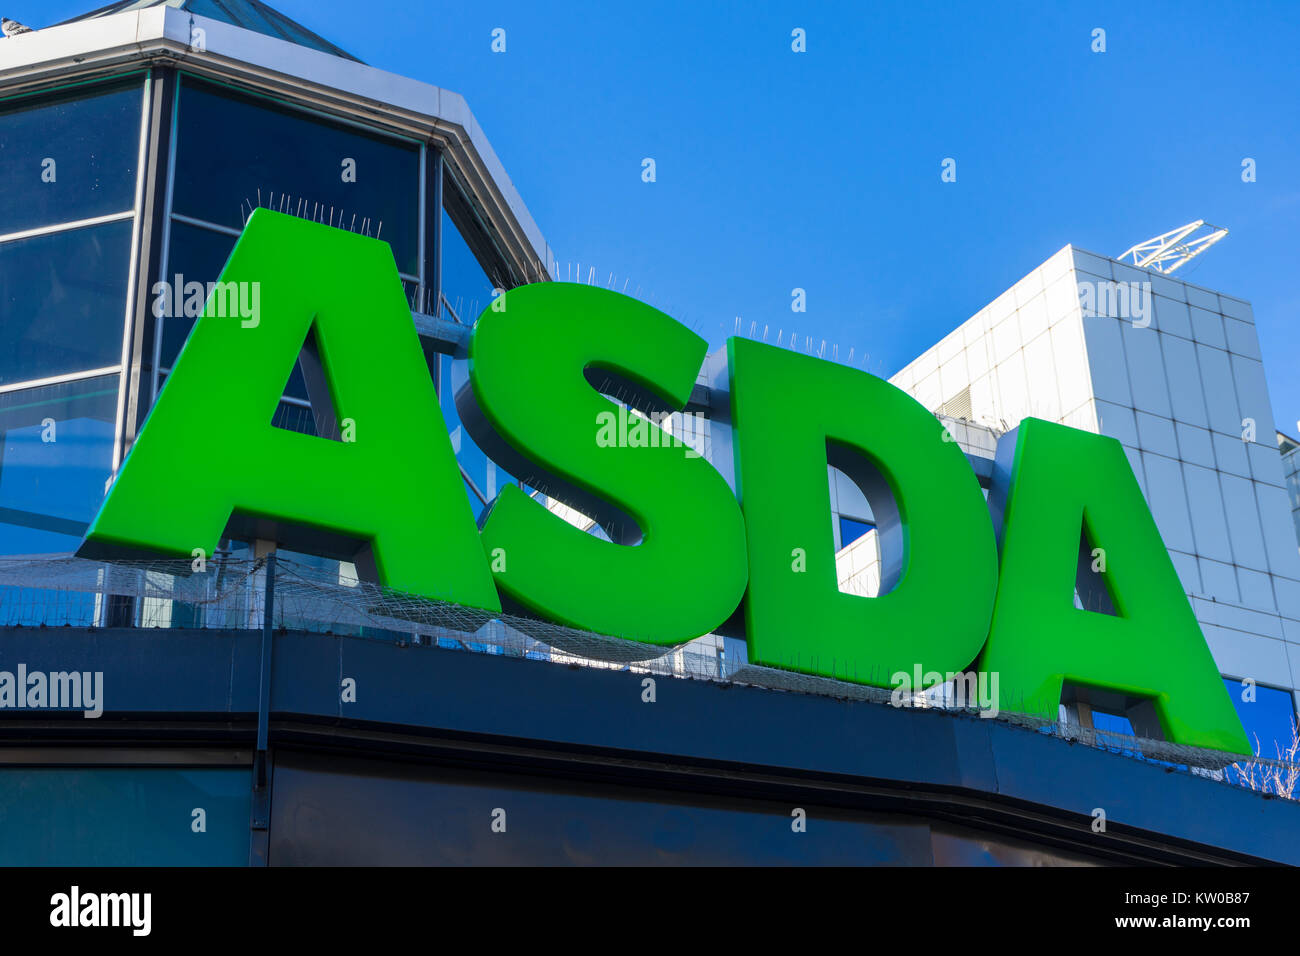 Entrance to supermarket ASDA, large green letters display in 2017, England, UK Stock Photo